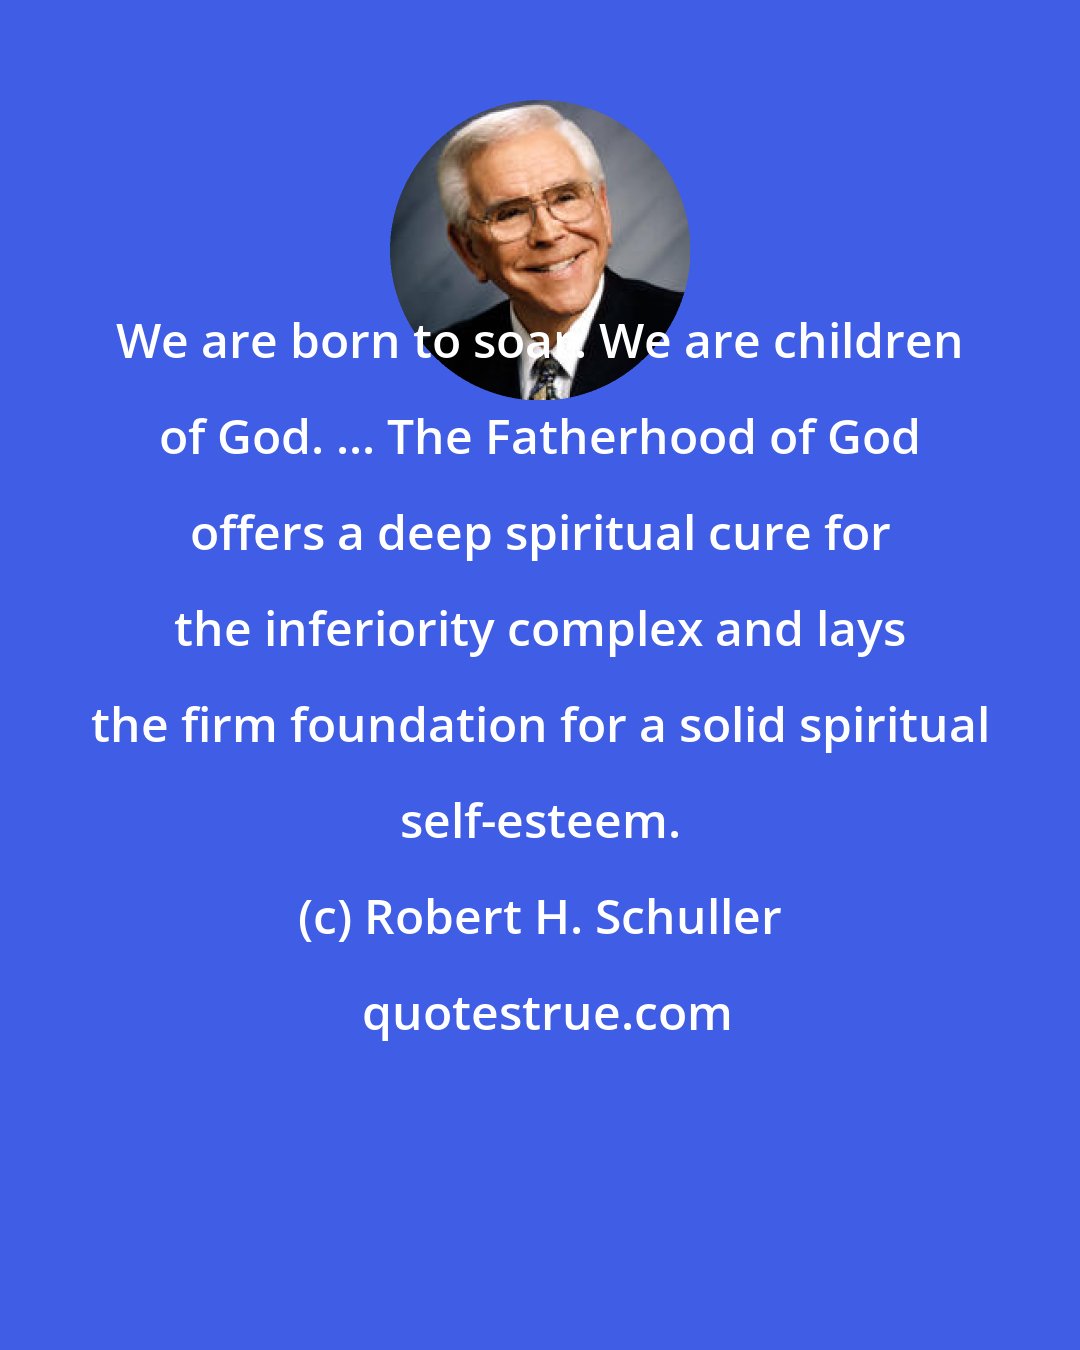 Robert H. Schuller: We are born to soar. We are children of God. ... The Fatherhood of God offers a deep spiritual cure for the inferiority complex and lays the firm foundation for a solid spiritual self-esteem.